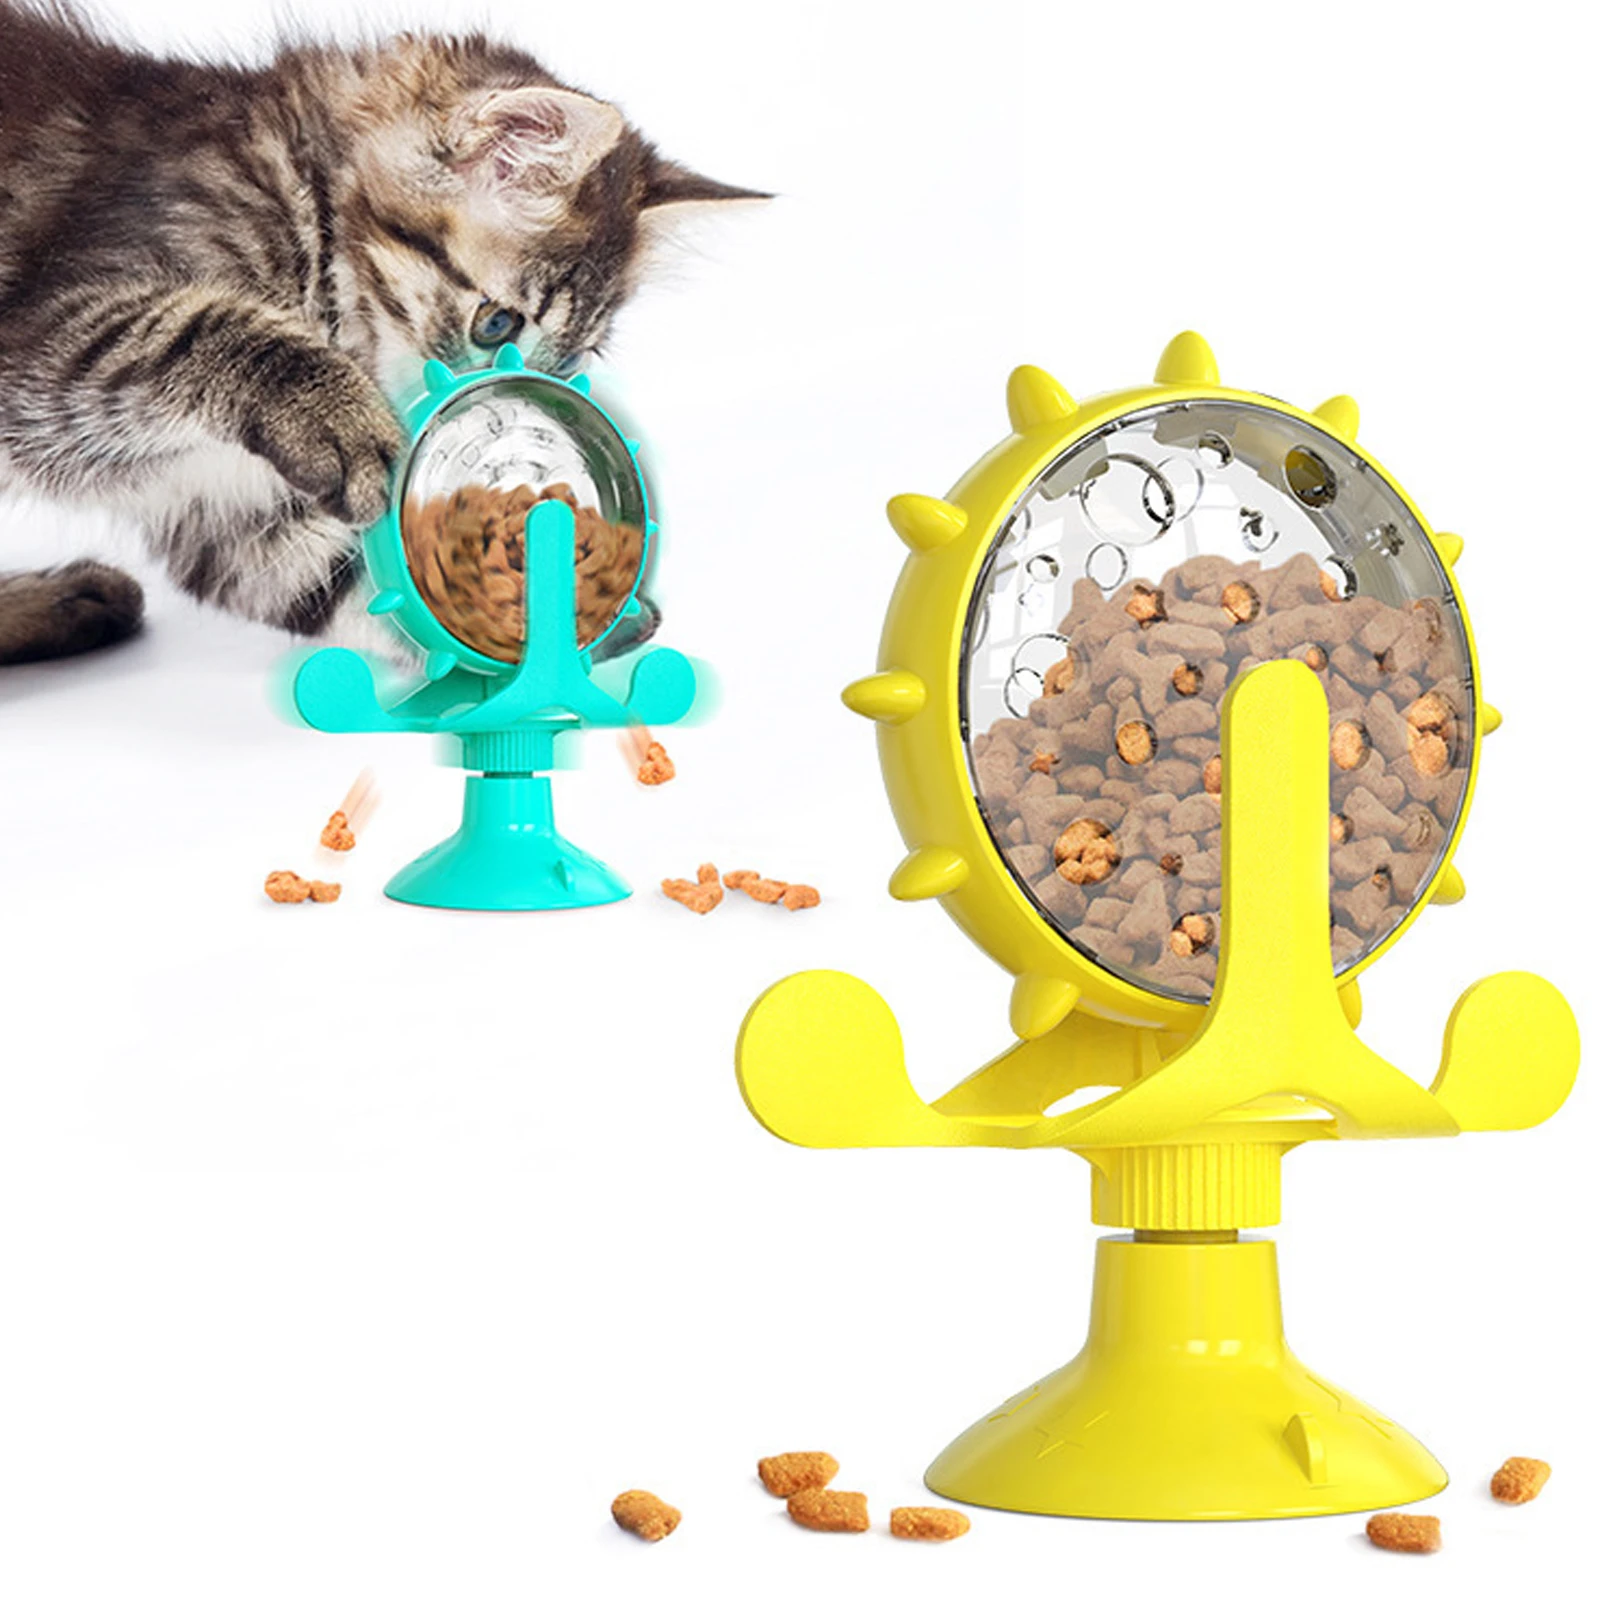 Leak Food Cat Toy Interactive Windmill Spinning Toy Pet Training Feeder Cats Feeding Pet Supplies Accessories Feeder Cat Toys rabbit toys